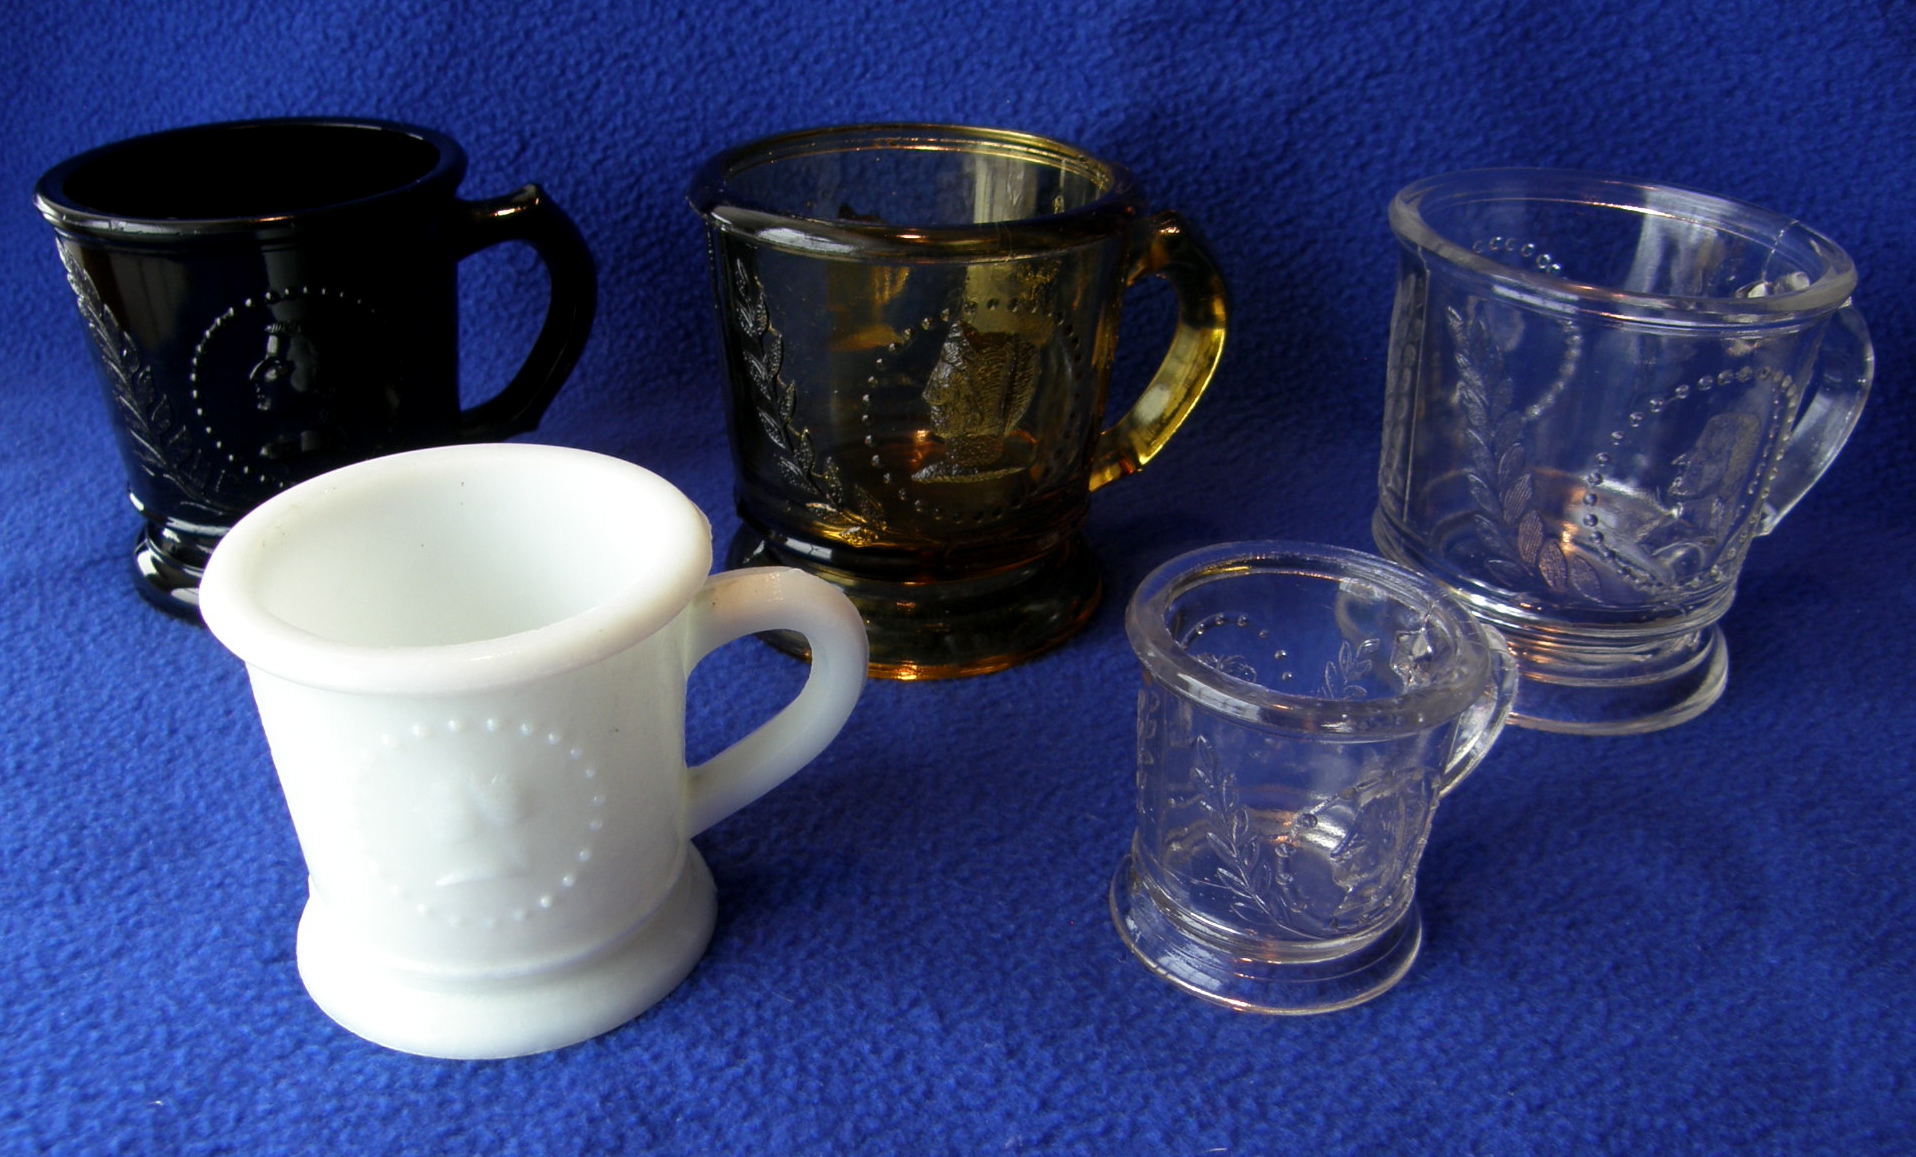 Five Medallion mugs, three large (black, clear, amber), one medium (white), one small (clear)